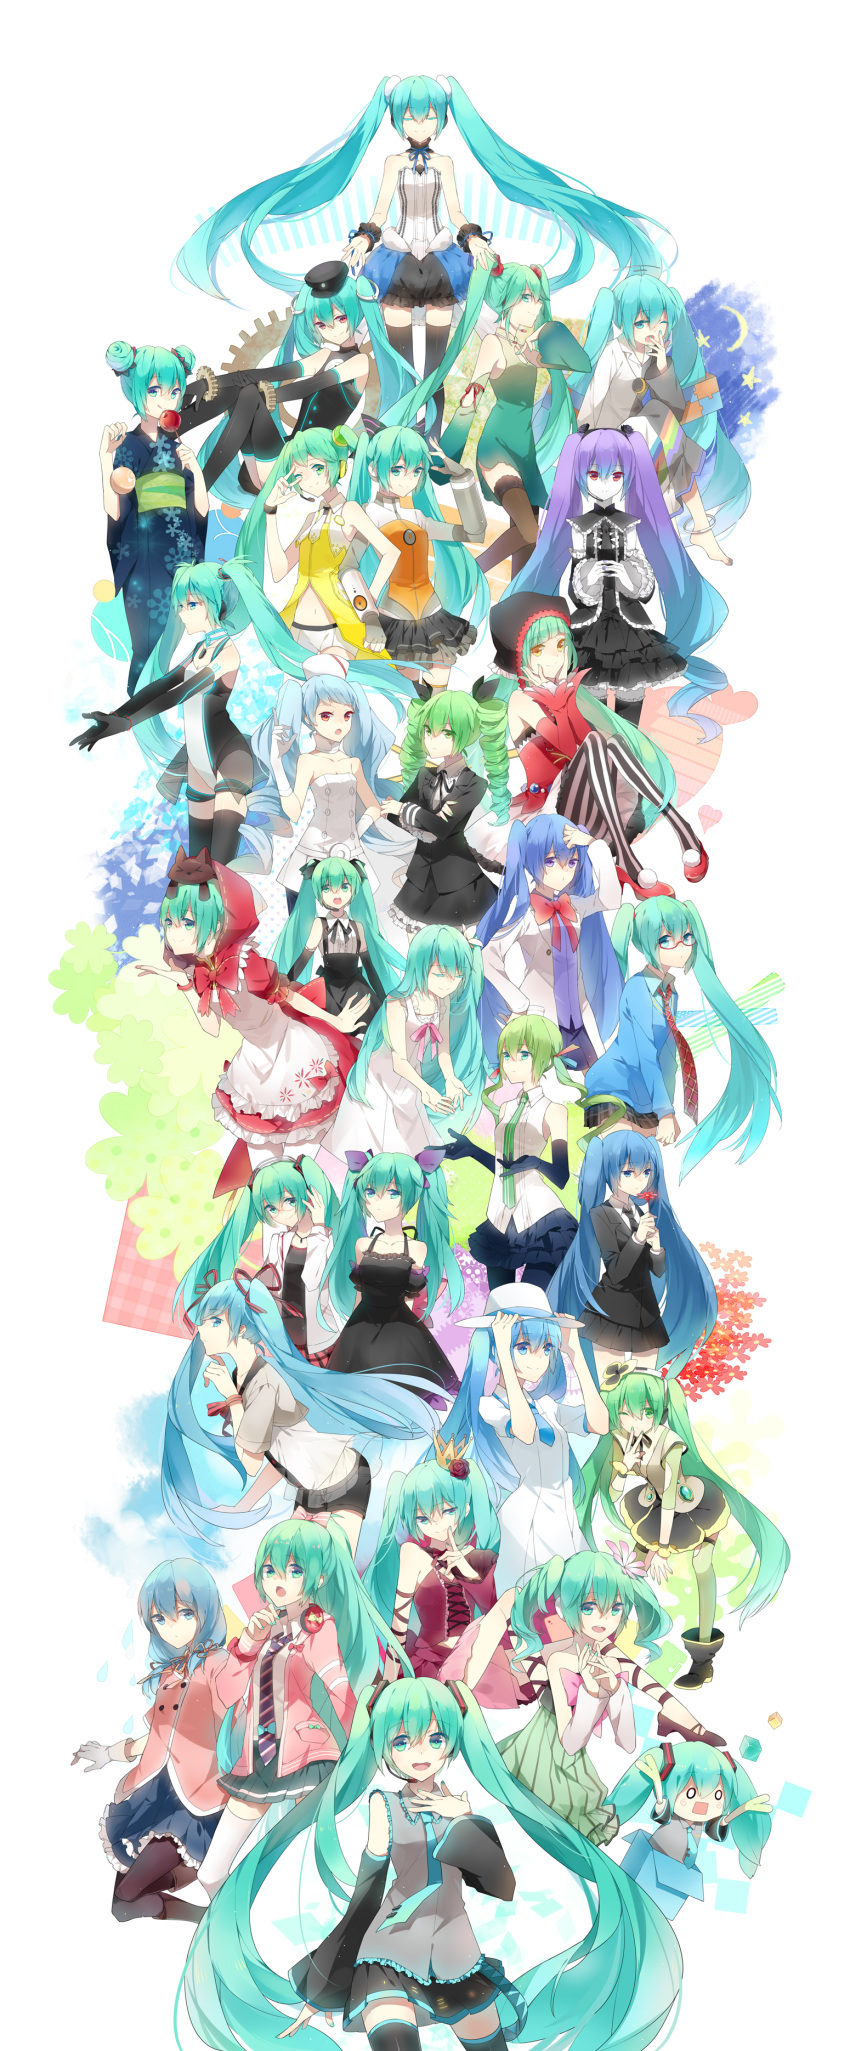 7th_dragon_2020 absurdres acute_(vocaloid) candy_apple cat_food_(vocaloid) closed_eyes colorful_x_melody_(vocaloid) crown detached_sleeves dress earmuffs elbow_gloves eyes_closed flower frills gears glasses gloves grimm's_fairy_tales hachune_miku hair_flower hair_ornament hair_ribbon hand_on_hip hat hatsune_miku hatsune_miku_no_gekishou_(vocaloid) headset highres himitsu_keisatsu_(vocaloid) japanese_clothes jewelry kimono kocchi_muite_baby_(vocaloid) koiiro_byoutou_(vocaloid) lace lace-trimmed_thighhighs leaning_forward leotard little_red_riding_hood little_red_riding_hood_(cosplay) little_red_riding_hood_(grimm) long_hair navel necklace necktie nurse odds_&amp;_ends_(vocaloid) open_mouth p0ckylo pantyhose project_diva project_diva_2nd project_diva_extend project_diva_f puzzle_(vocaloid) race_queen ribbon romeo_to_cinderella_(vocaloid) sadistic_music_factory_(vocaloid) saihate_(vocaloid) shorts sitting skirt smile songover spring_onion thigh-highs thighhighs twintails v vertical-striped_legwear vertical_stripes very_long_hair vocaloid wink world's_end_dancehall_(vocaloid) yawning yellow_(vocaloid) yukata